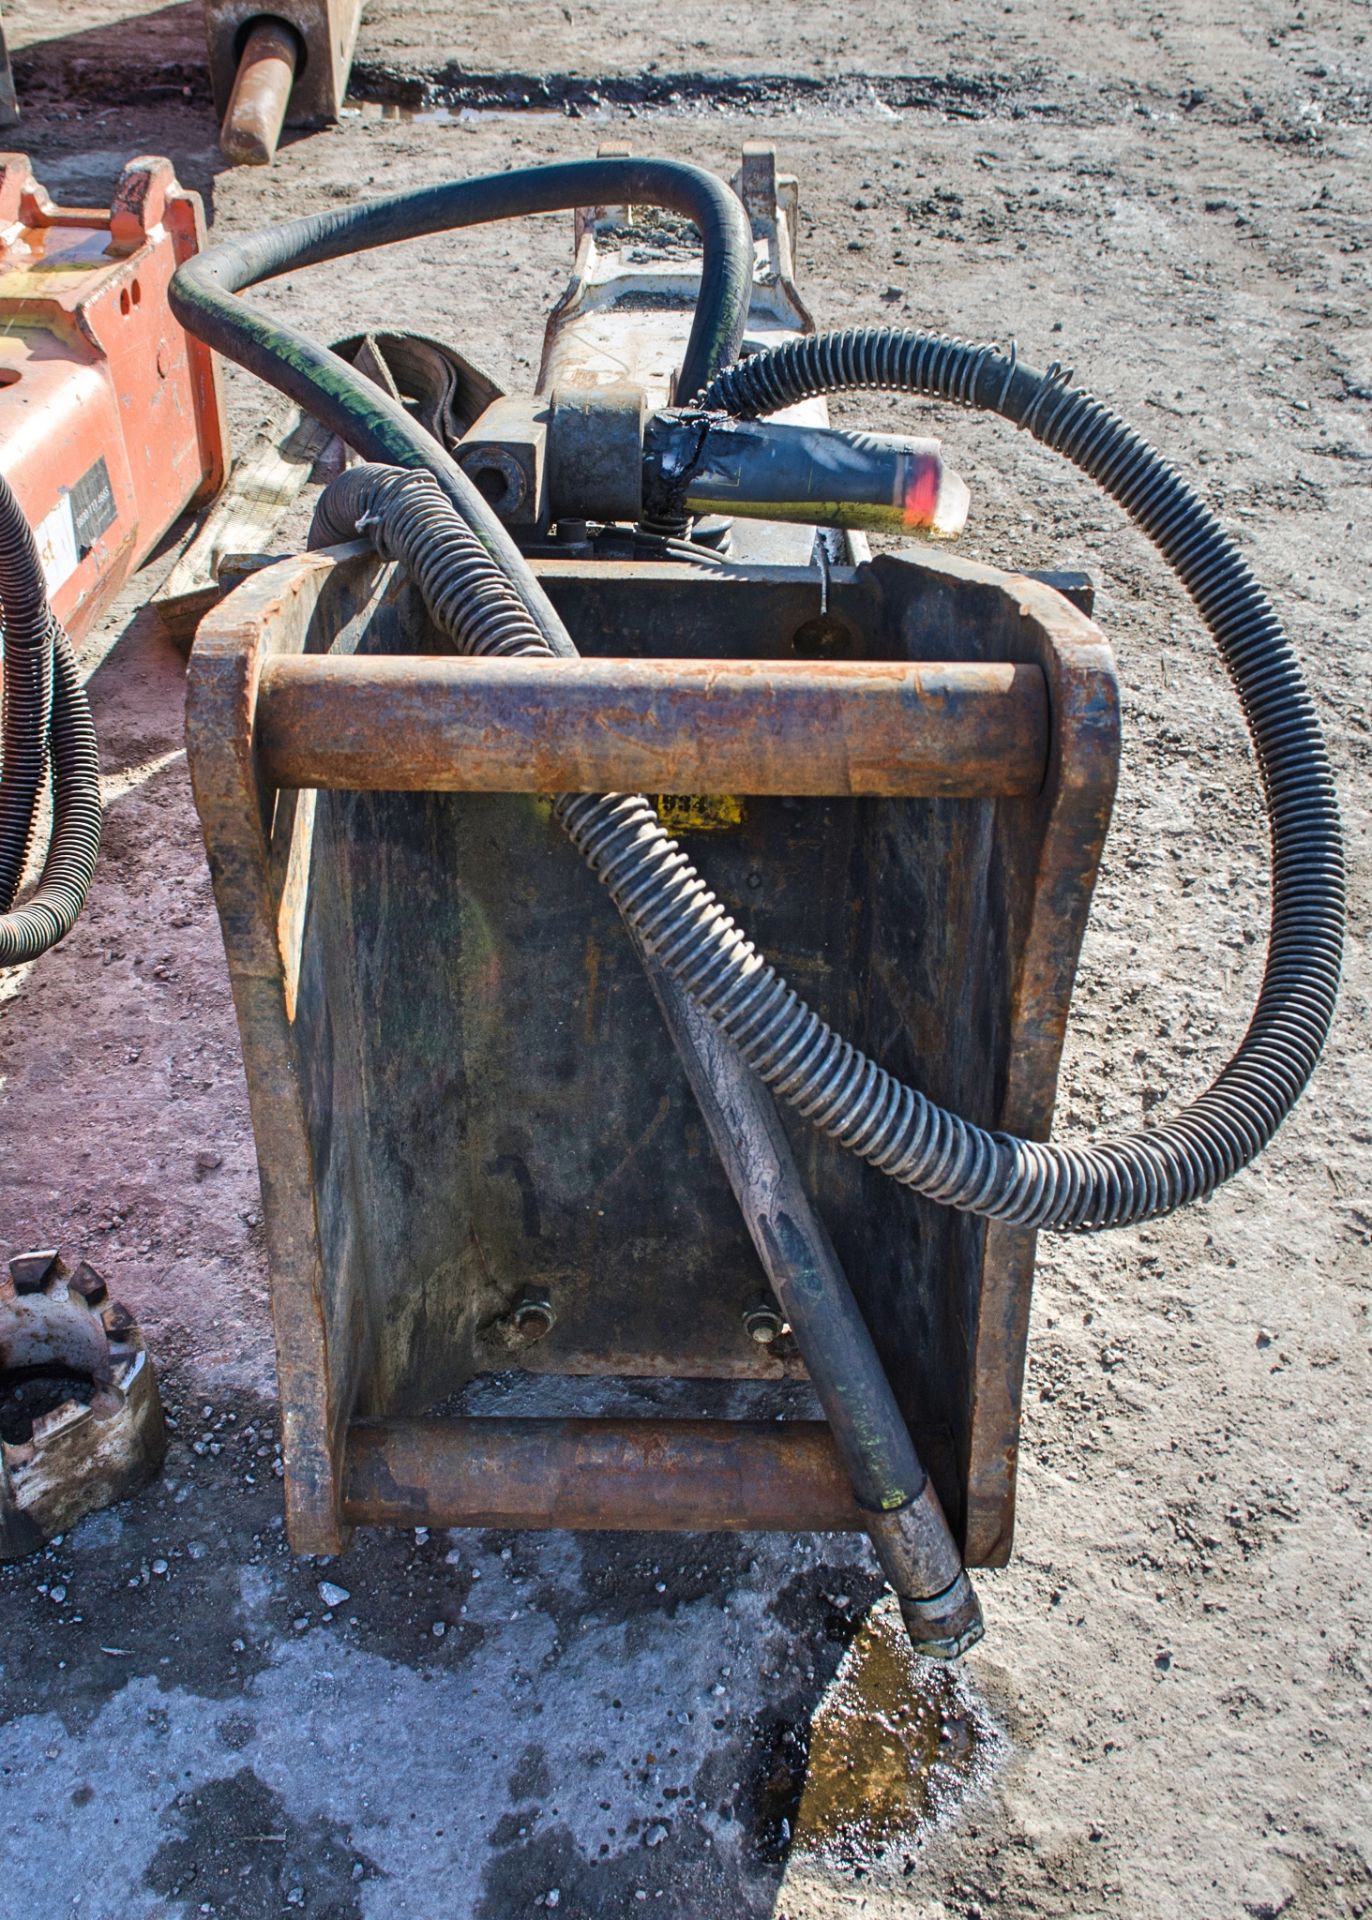 Construction Tools RX14L hydraulic breaker to suit 13-18 tonne excavator c/w Engcon headstock Pin - Image 4 of 4